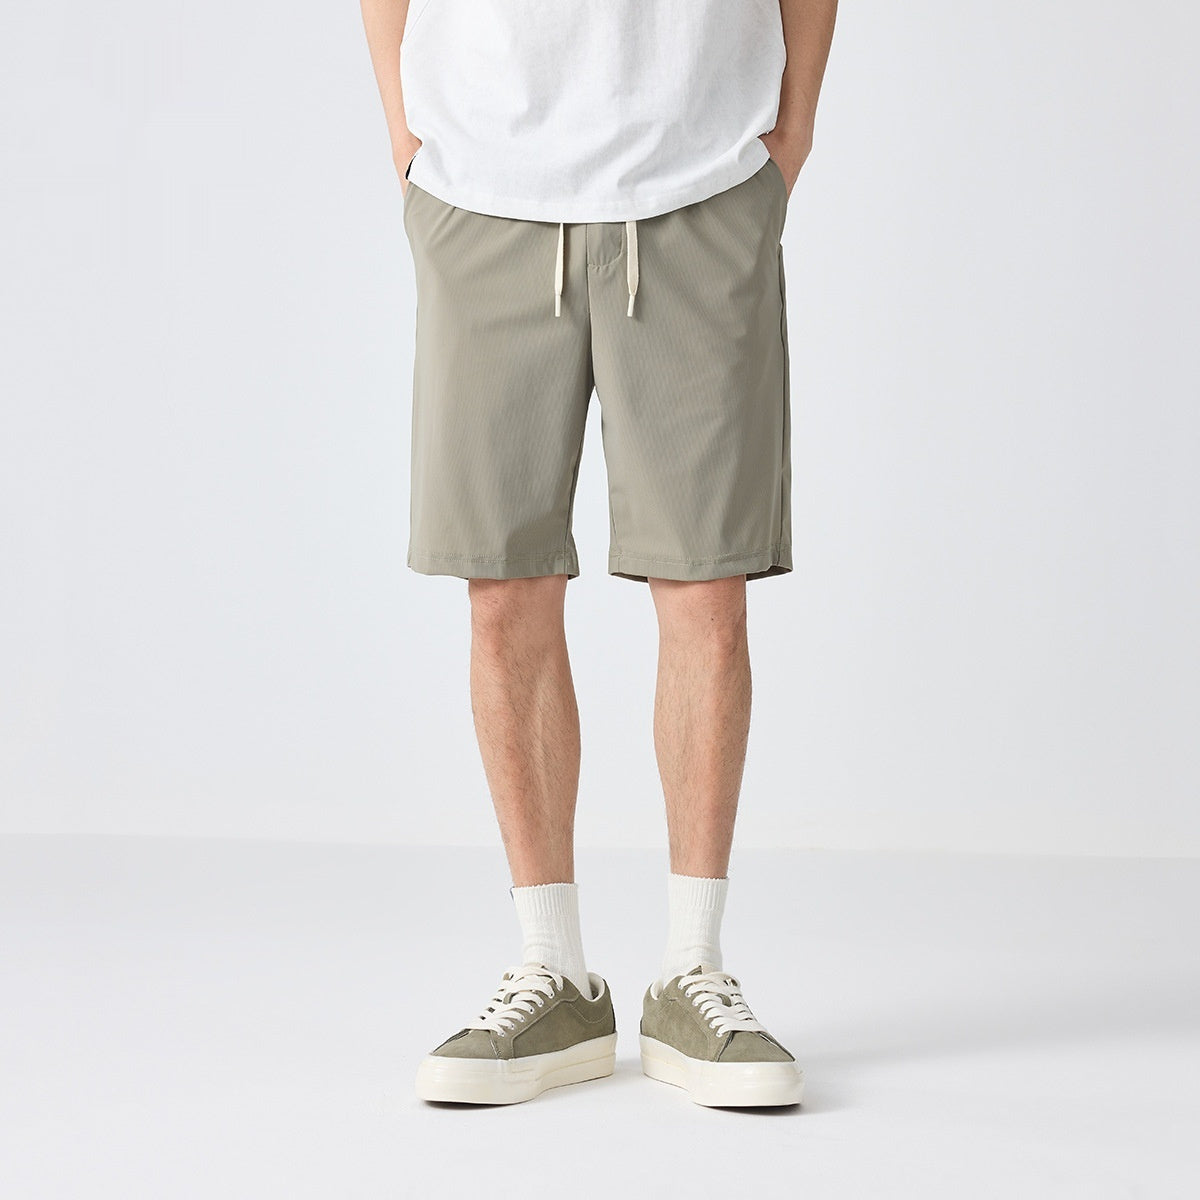 Simple Loose Cool Casual Shorts Straight Fifth Pants